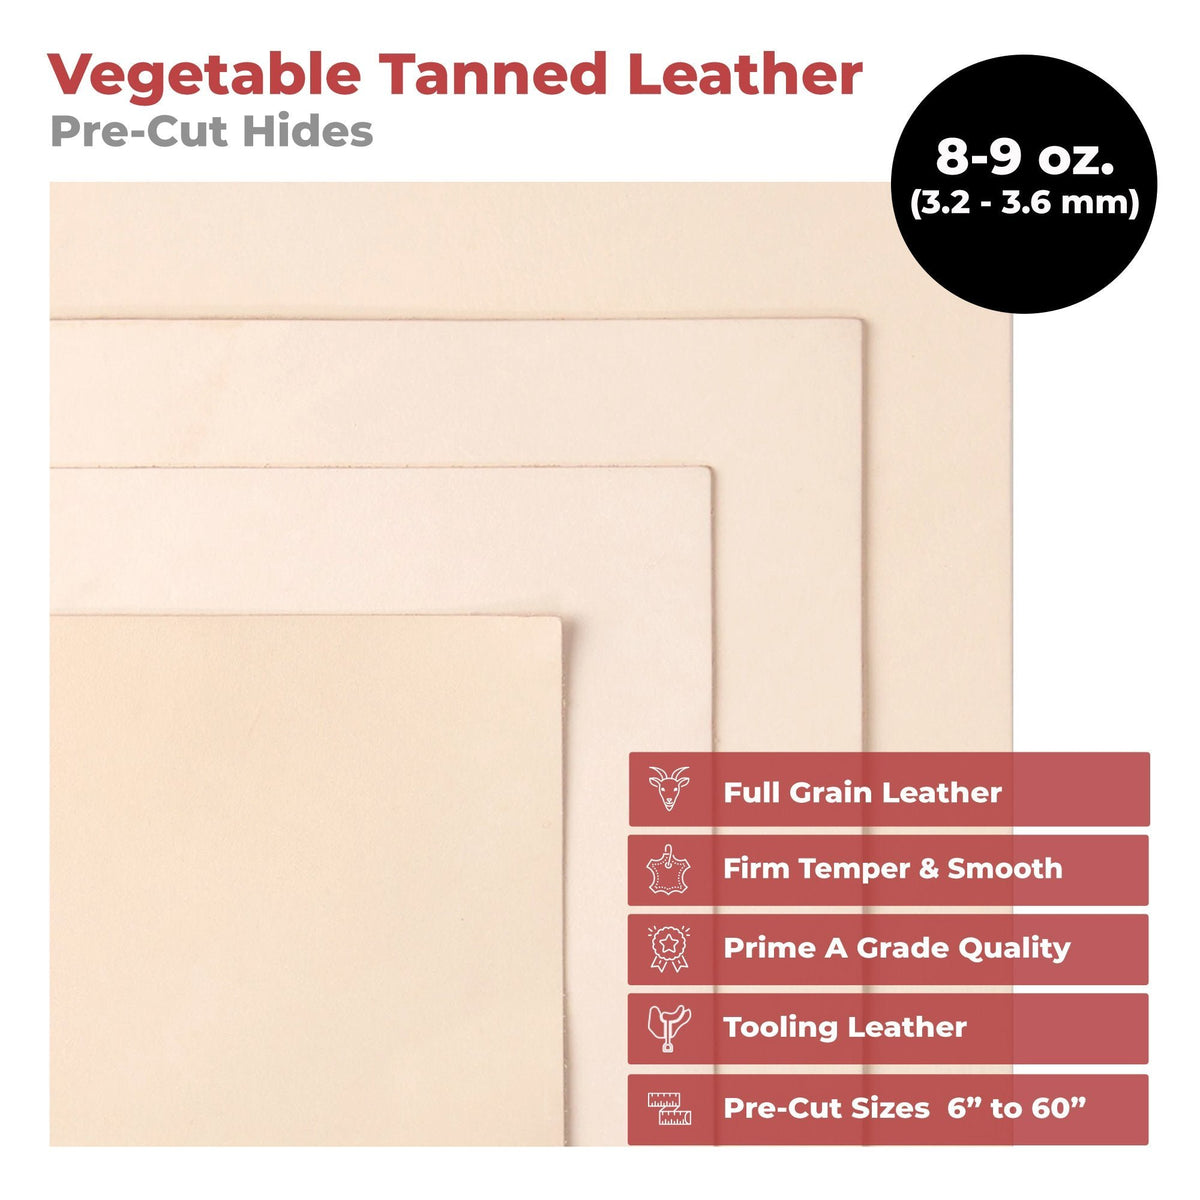 ELW 4-6 oz. 1.8-2.4mm Thickness, 4 LB Vegetable Tanned Leather Scraps,  Mixed Whiskey, Cowhide Remnants Full Grain Leather for Tooling, Holsters,  Knife